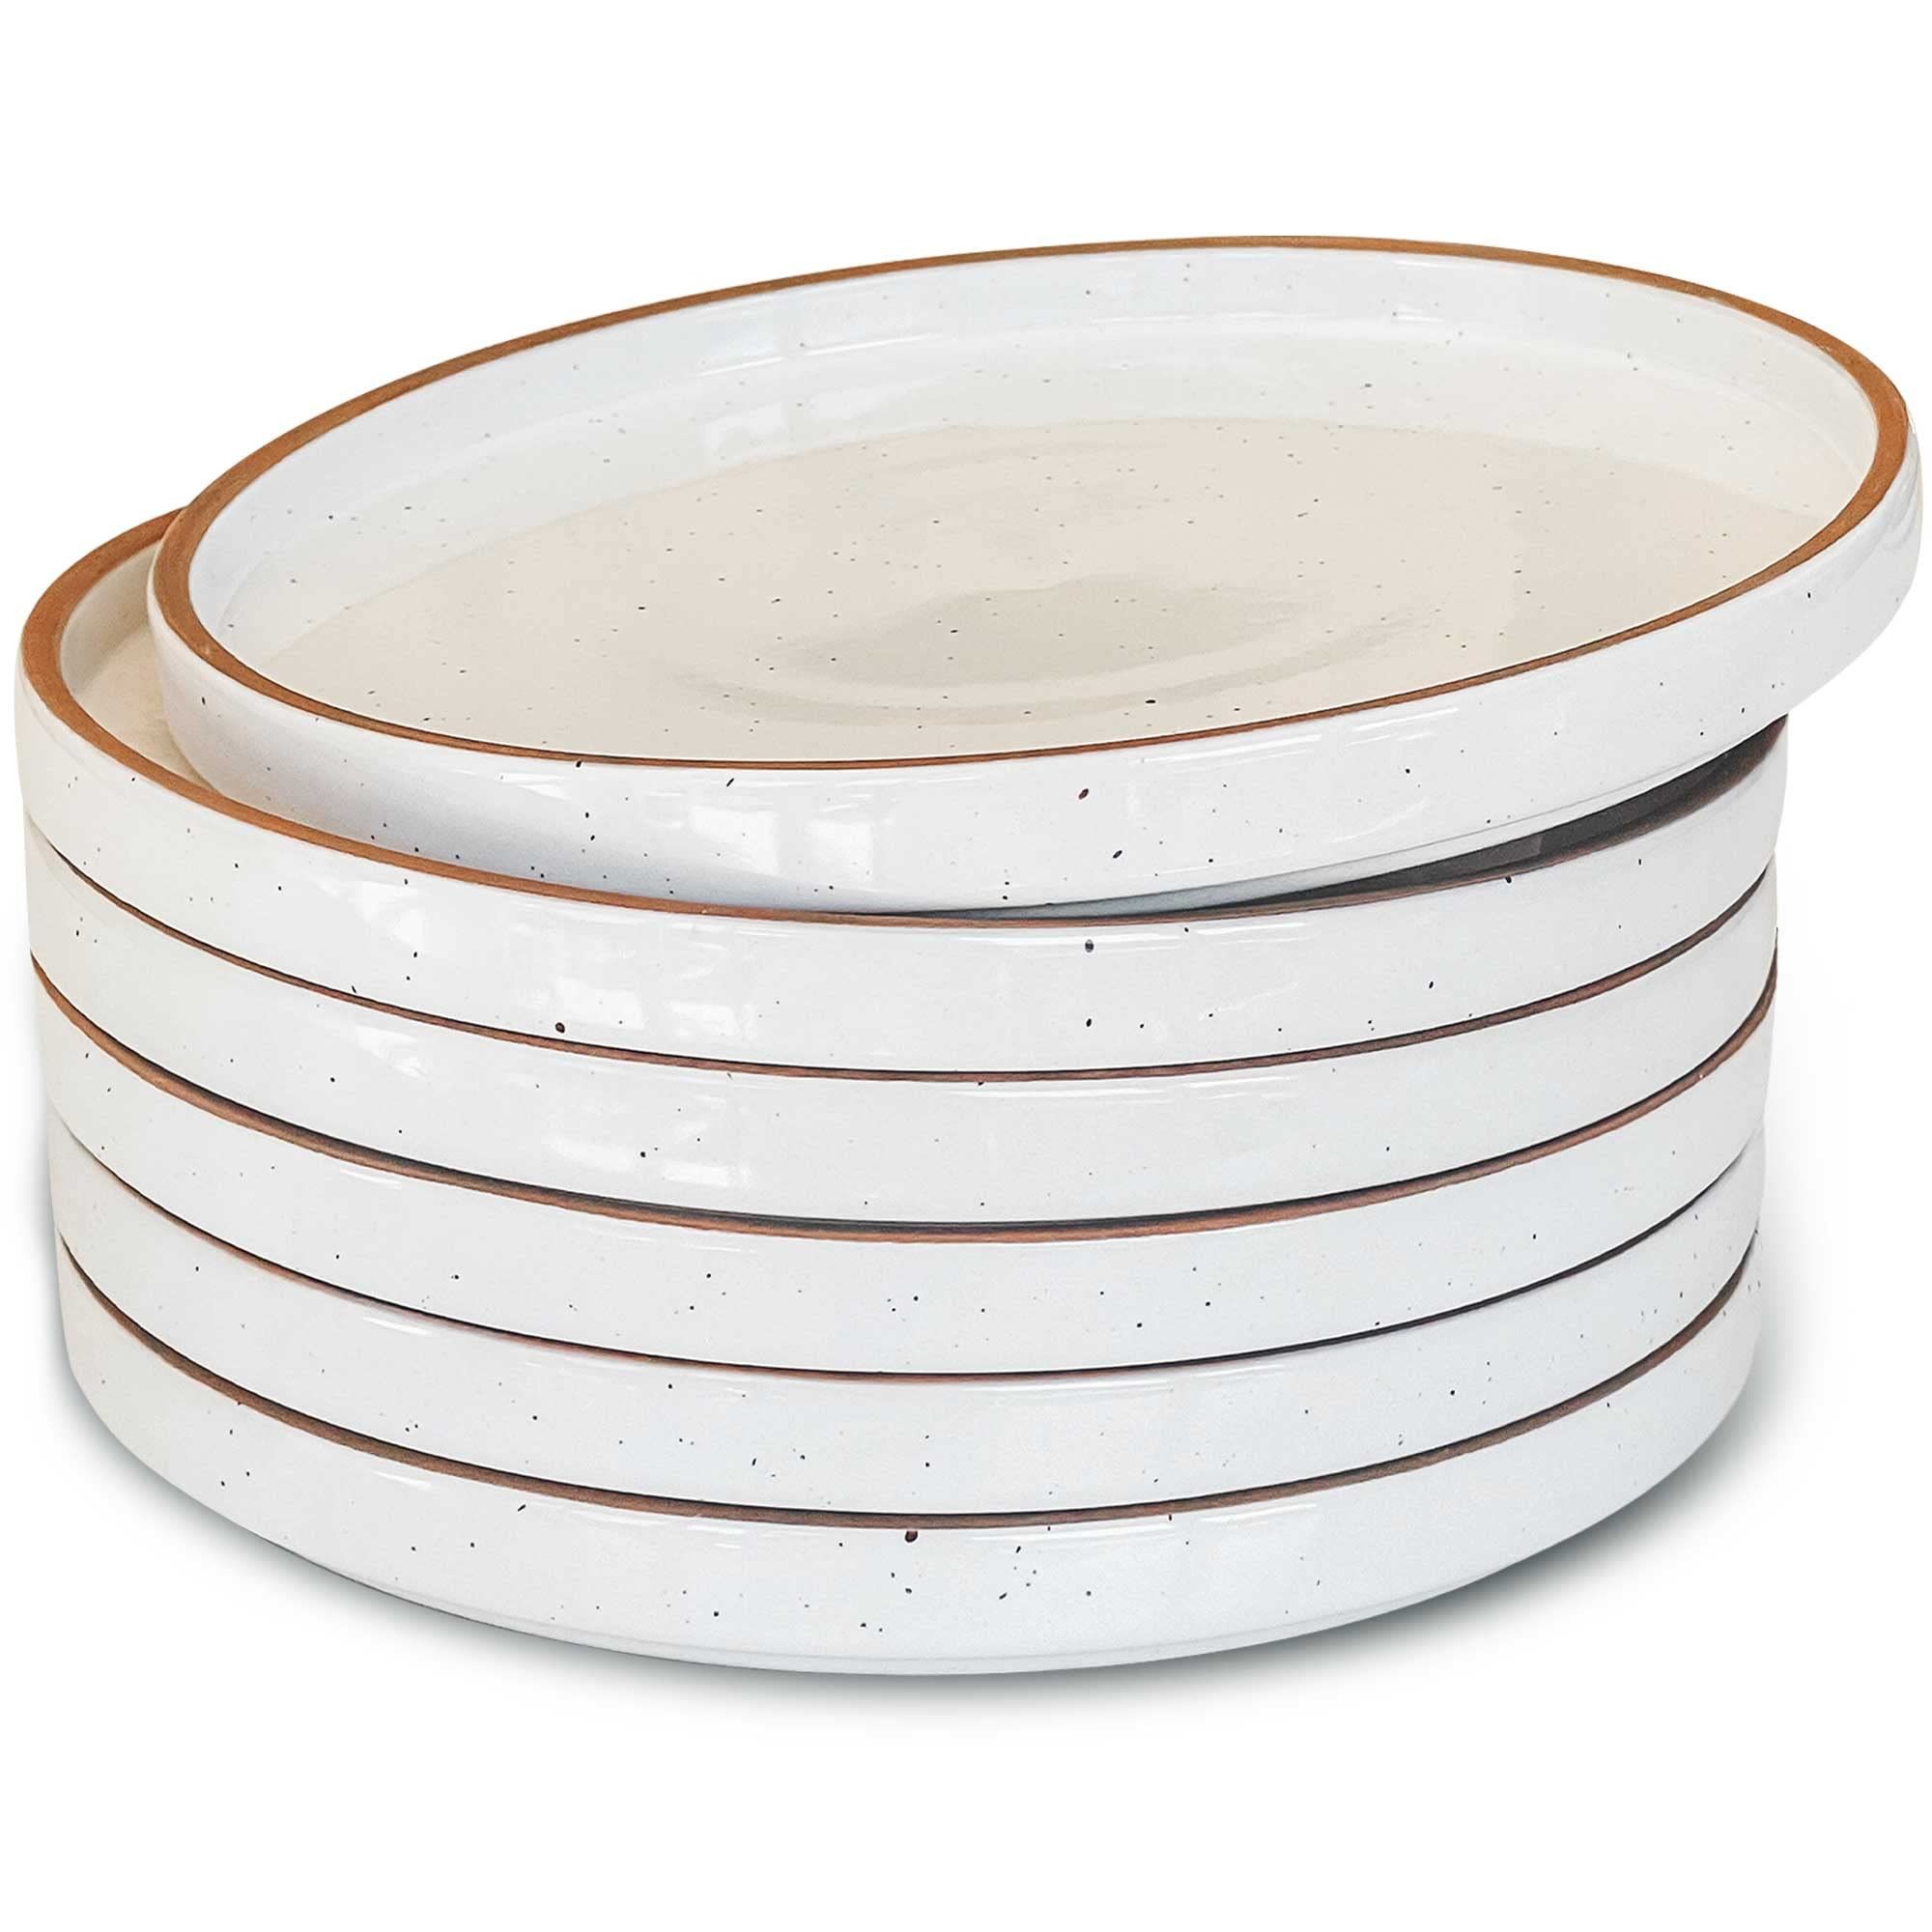 Mora Ceramic Flat Plates Set of 6-8 in - The Dessert, Salad, Appetizer, Small Lunch, etc Plate. Microwave, Oven, and Dishwasher Safe, Scratch Resistant. Kitchen Porcelain Dish - Vanilla White | Amazon (US)